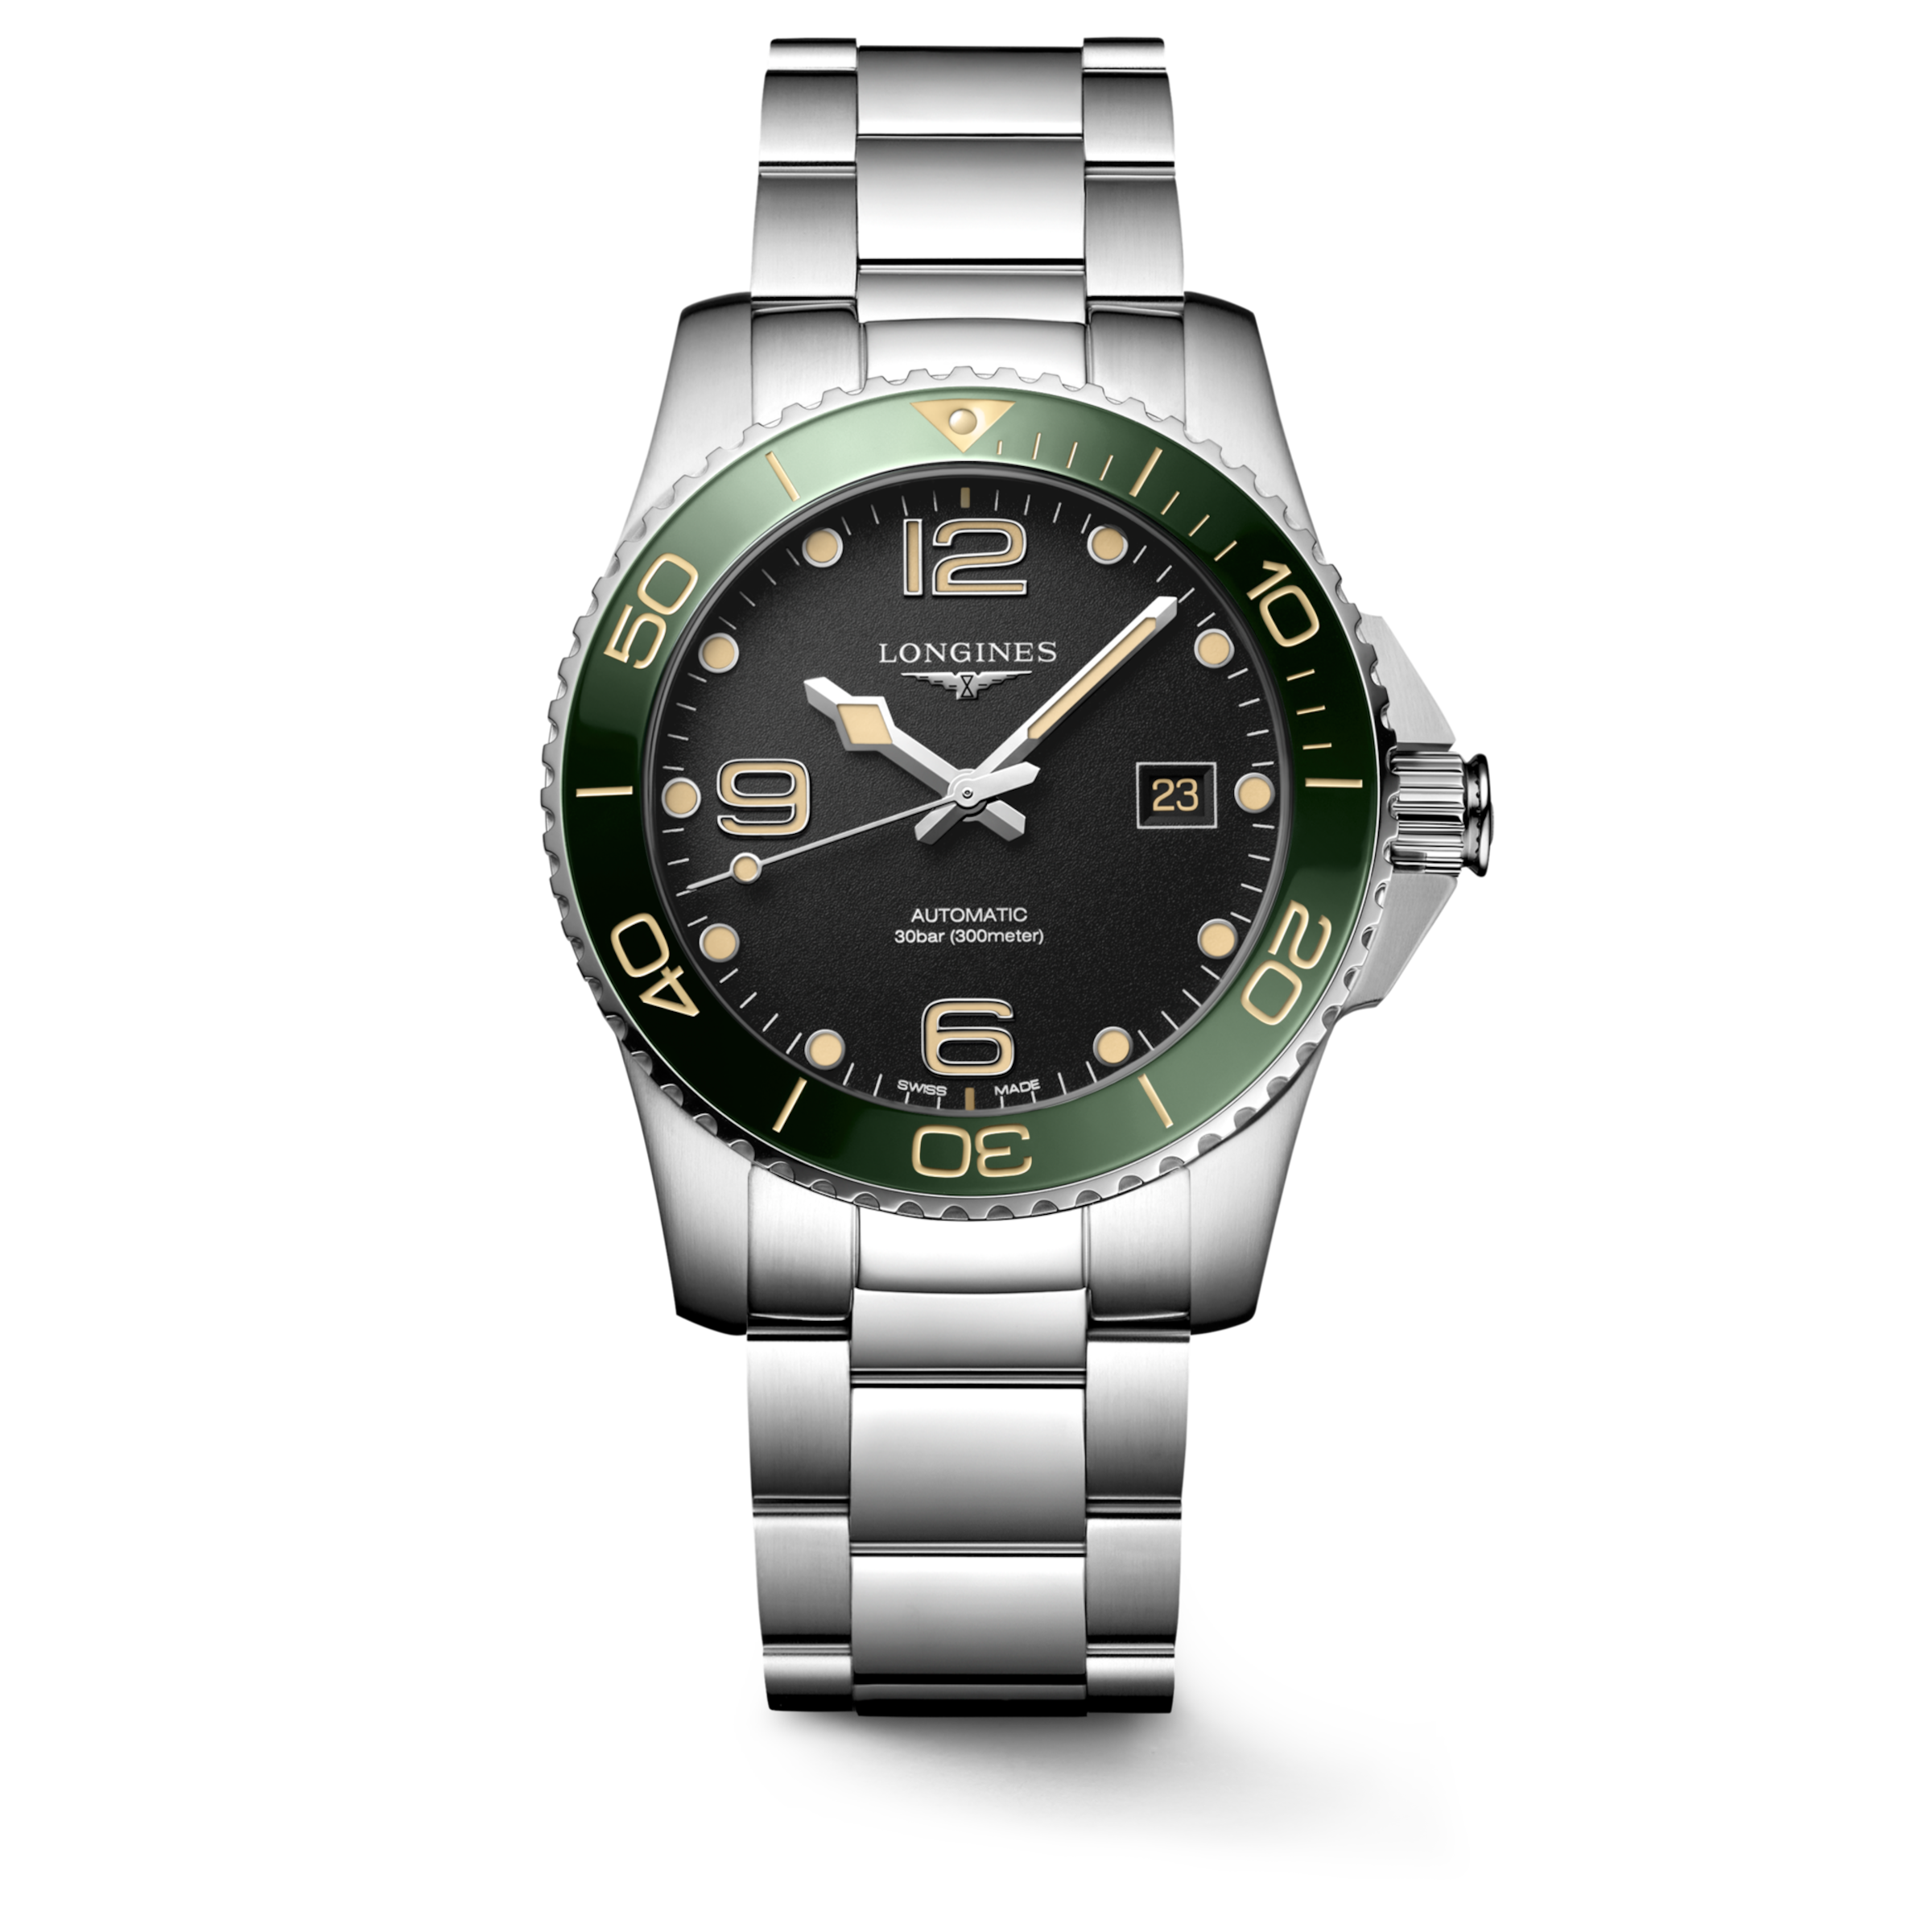 Longines HYDROCONQUEST Automatic Stainless steel and ceramic bezel Watch - L3.781.4.05.6